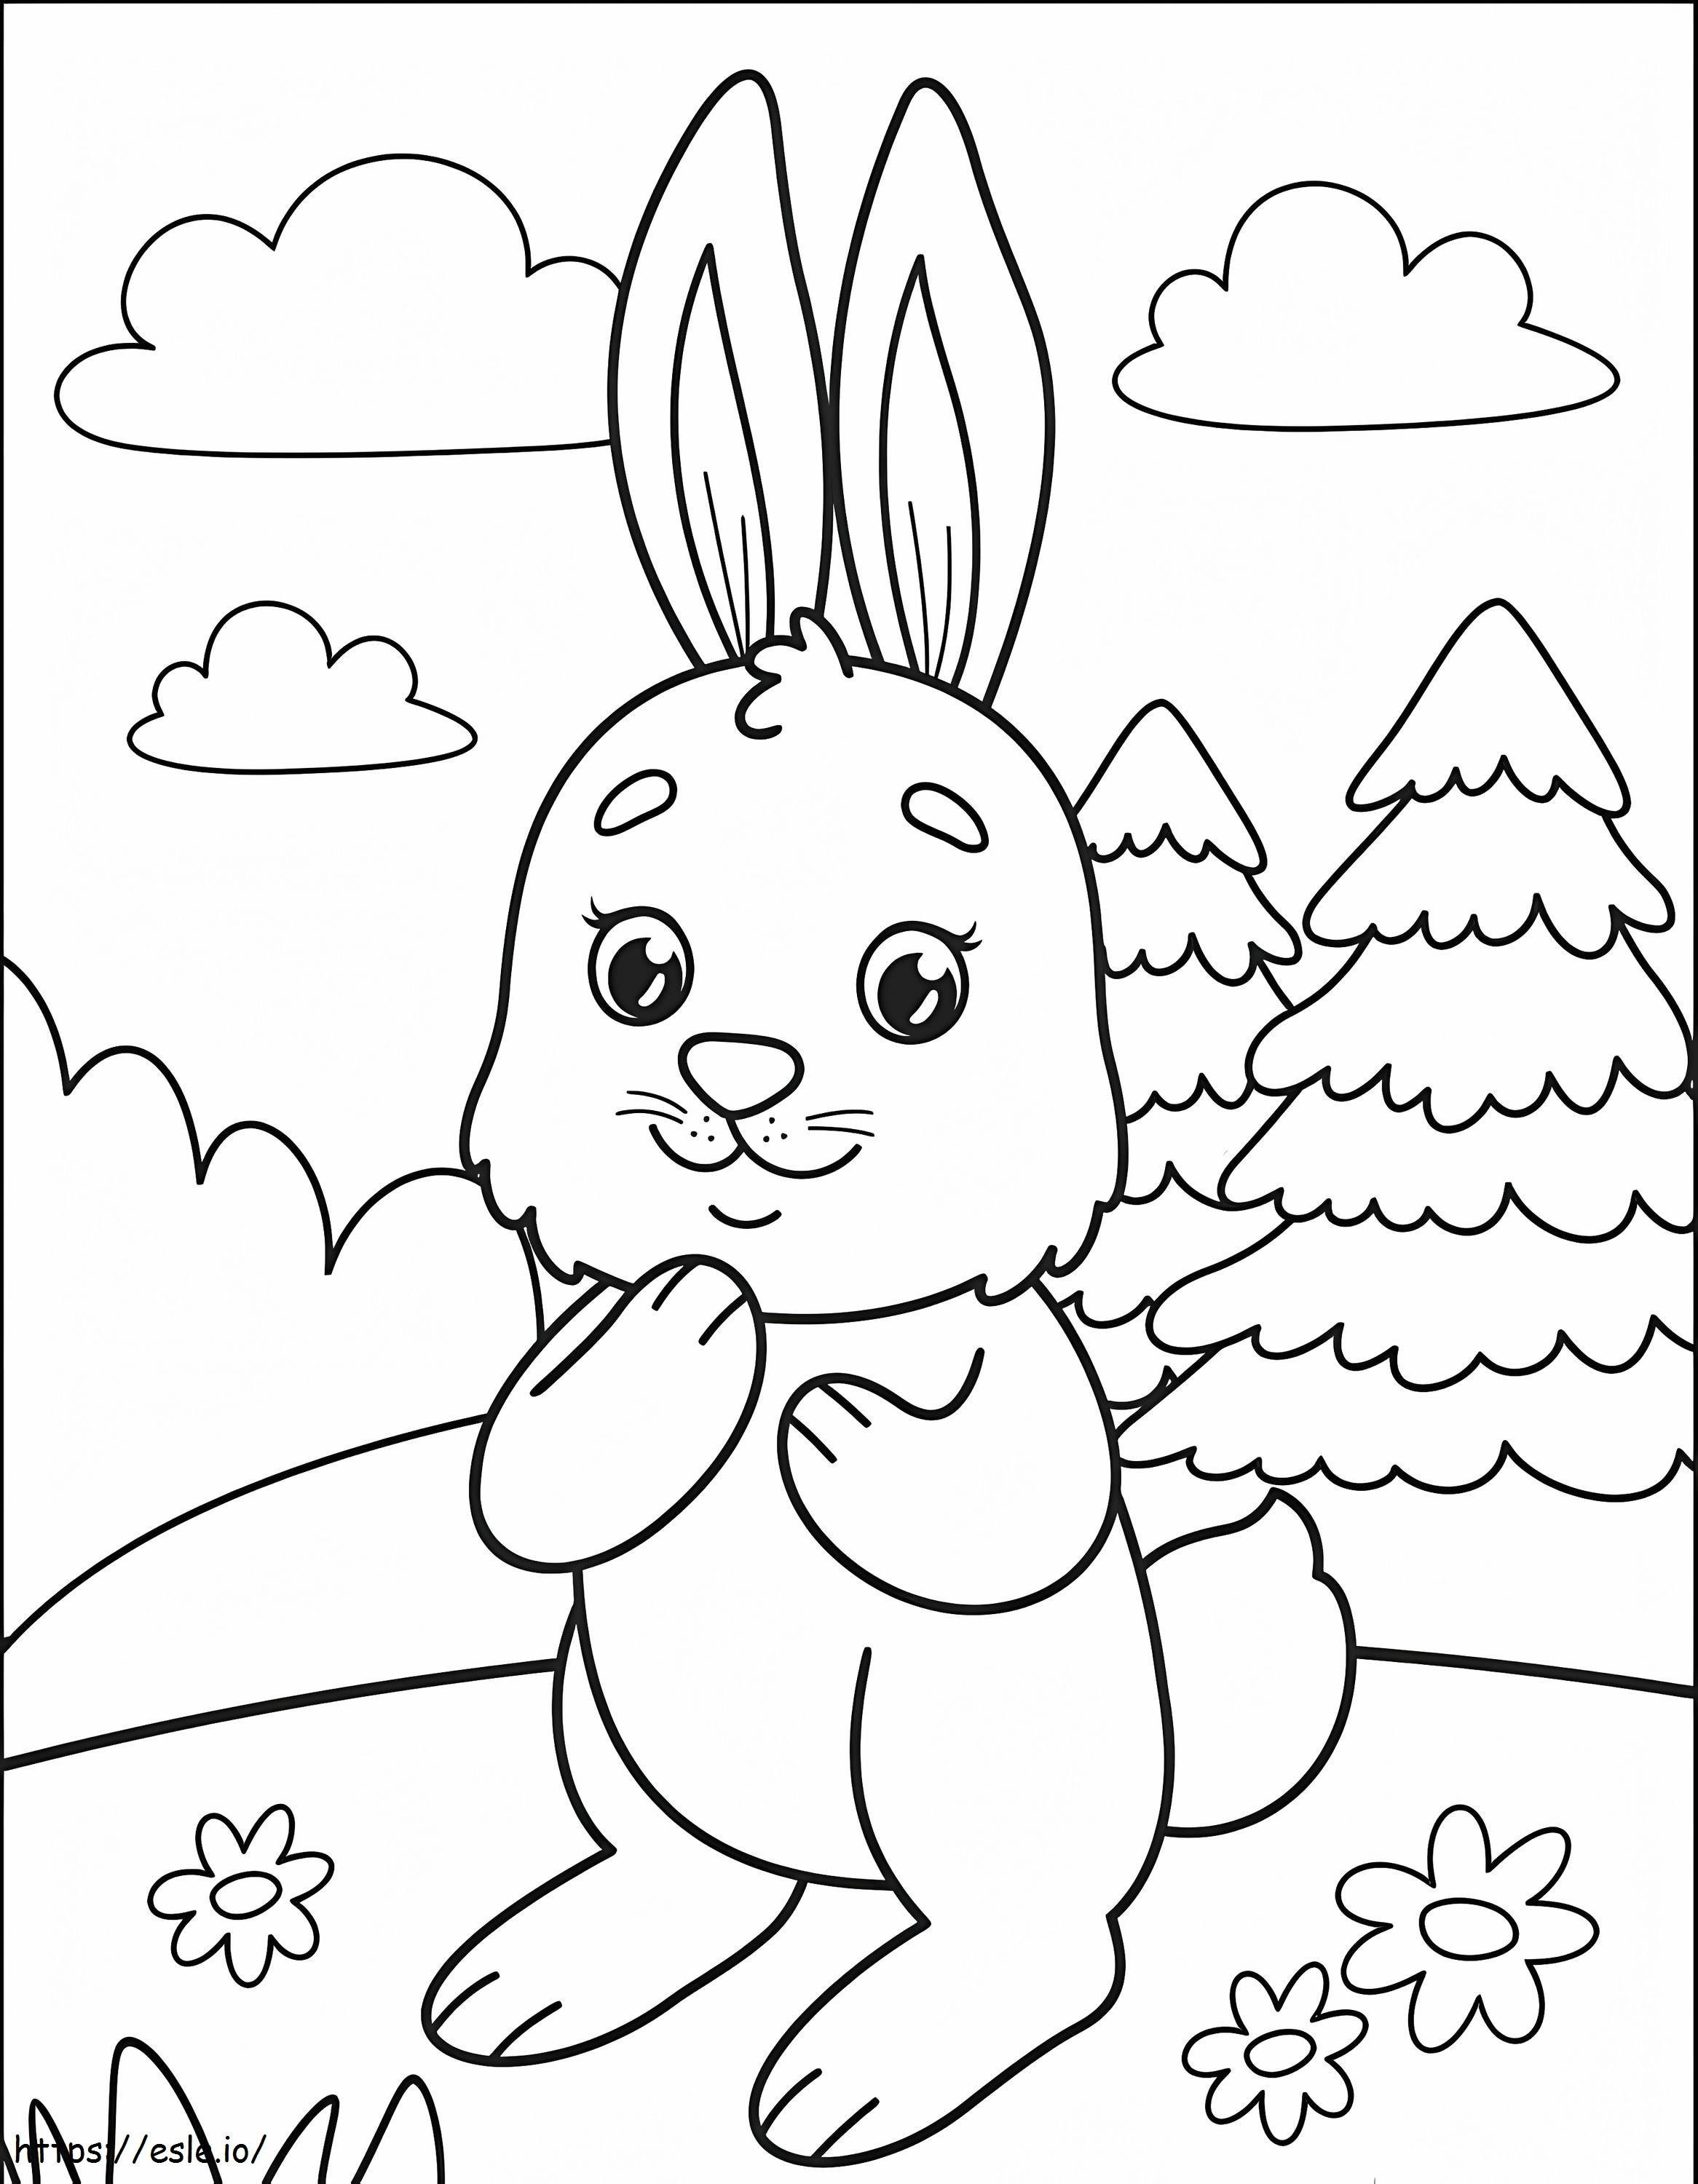 Rabbit Is Cute coloring page